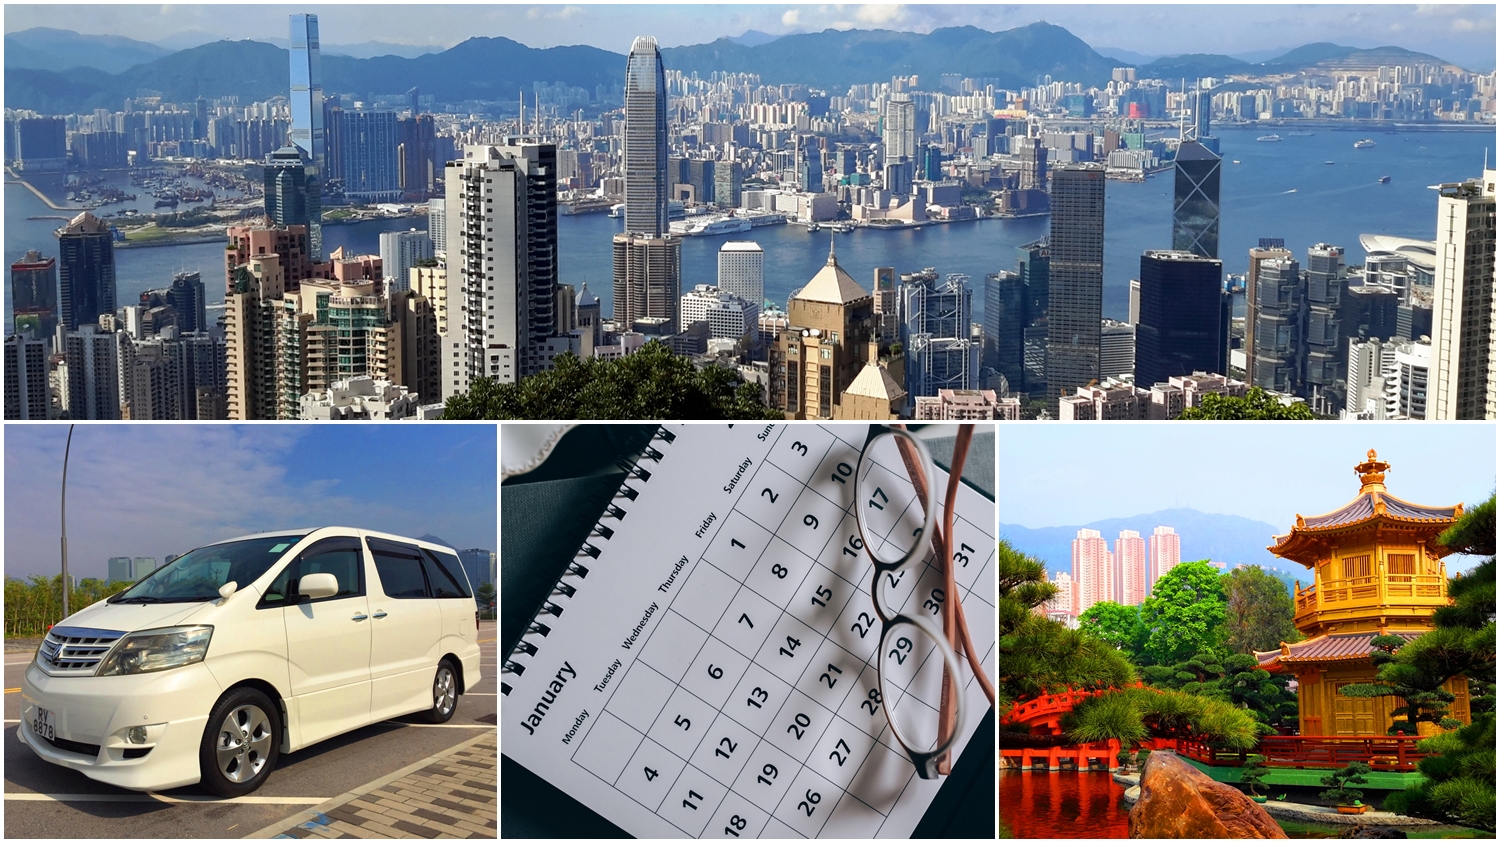 WHAT ARE THE POINTS TO CONSIDER WHEN YOU BOOK A HONG KONG TOUR PACKAGE?